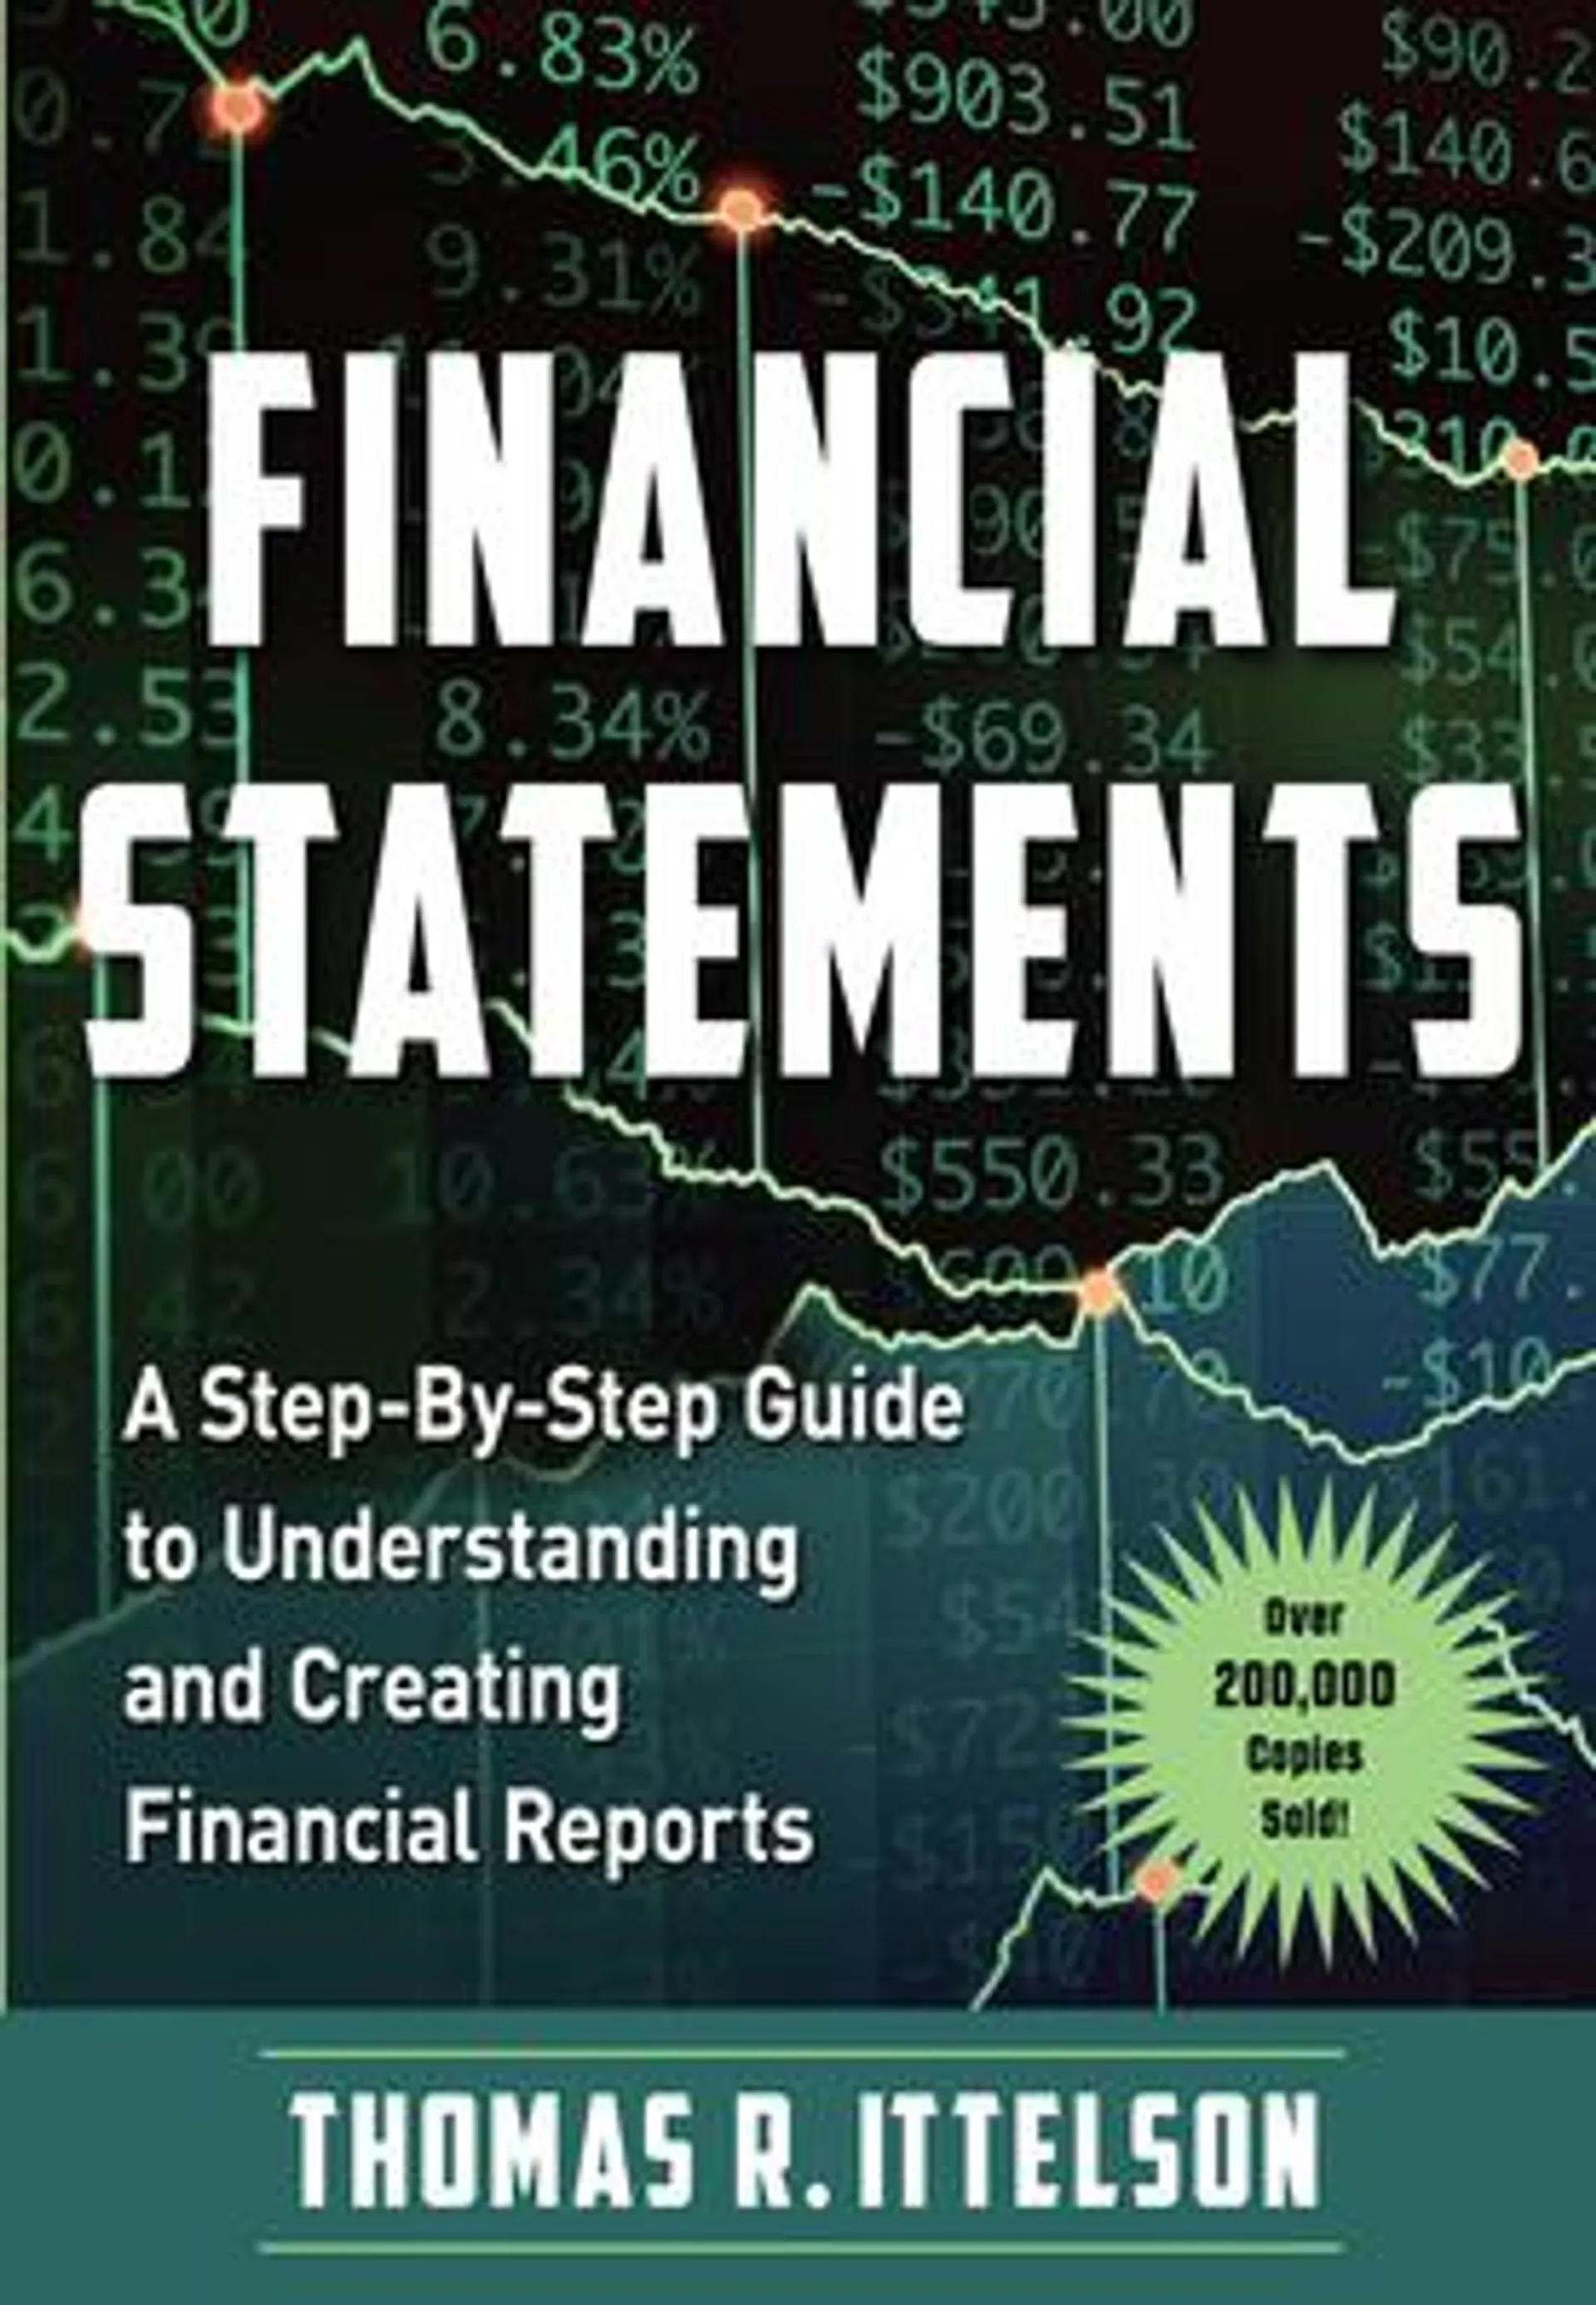 Financial Statements: A Step-By-Step Guide to Understanding and Creating Financial Reports (Over 200,000 Copies Sold!) (Reissue, Classic edition)